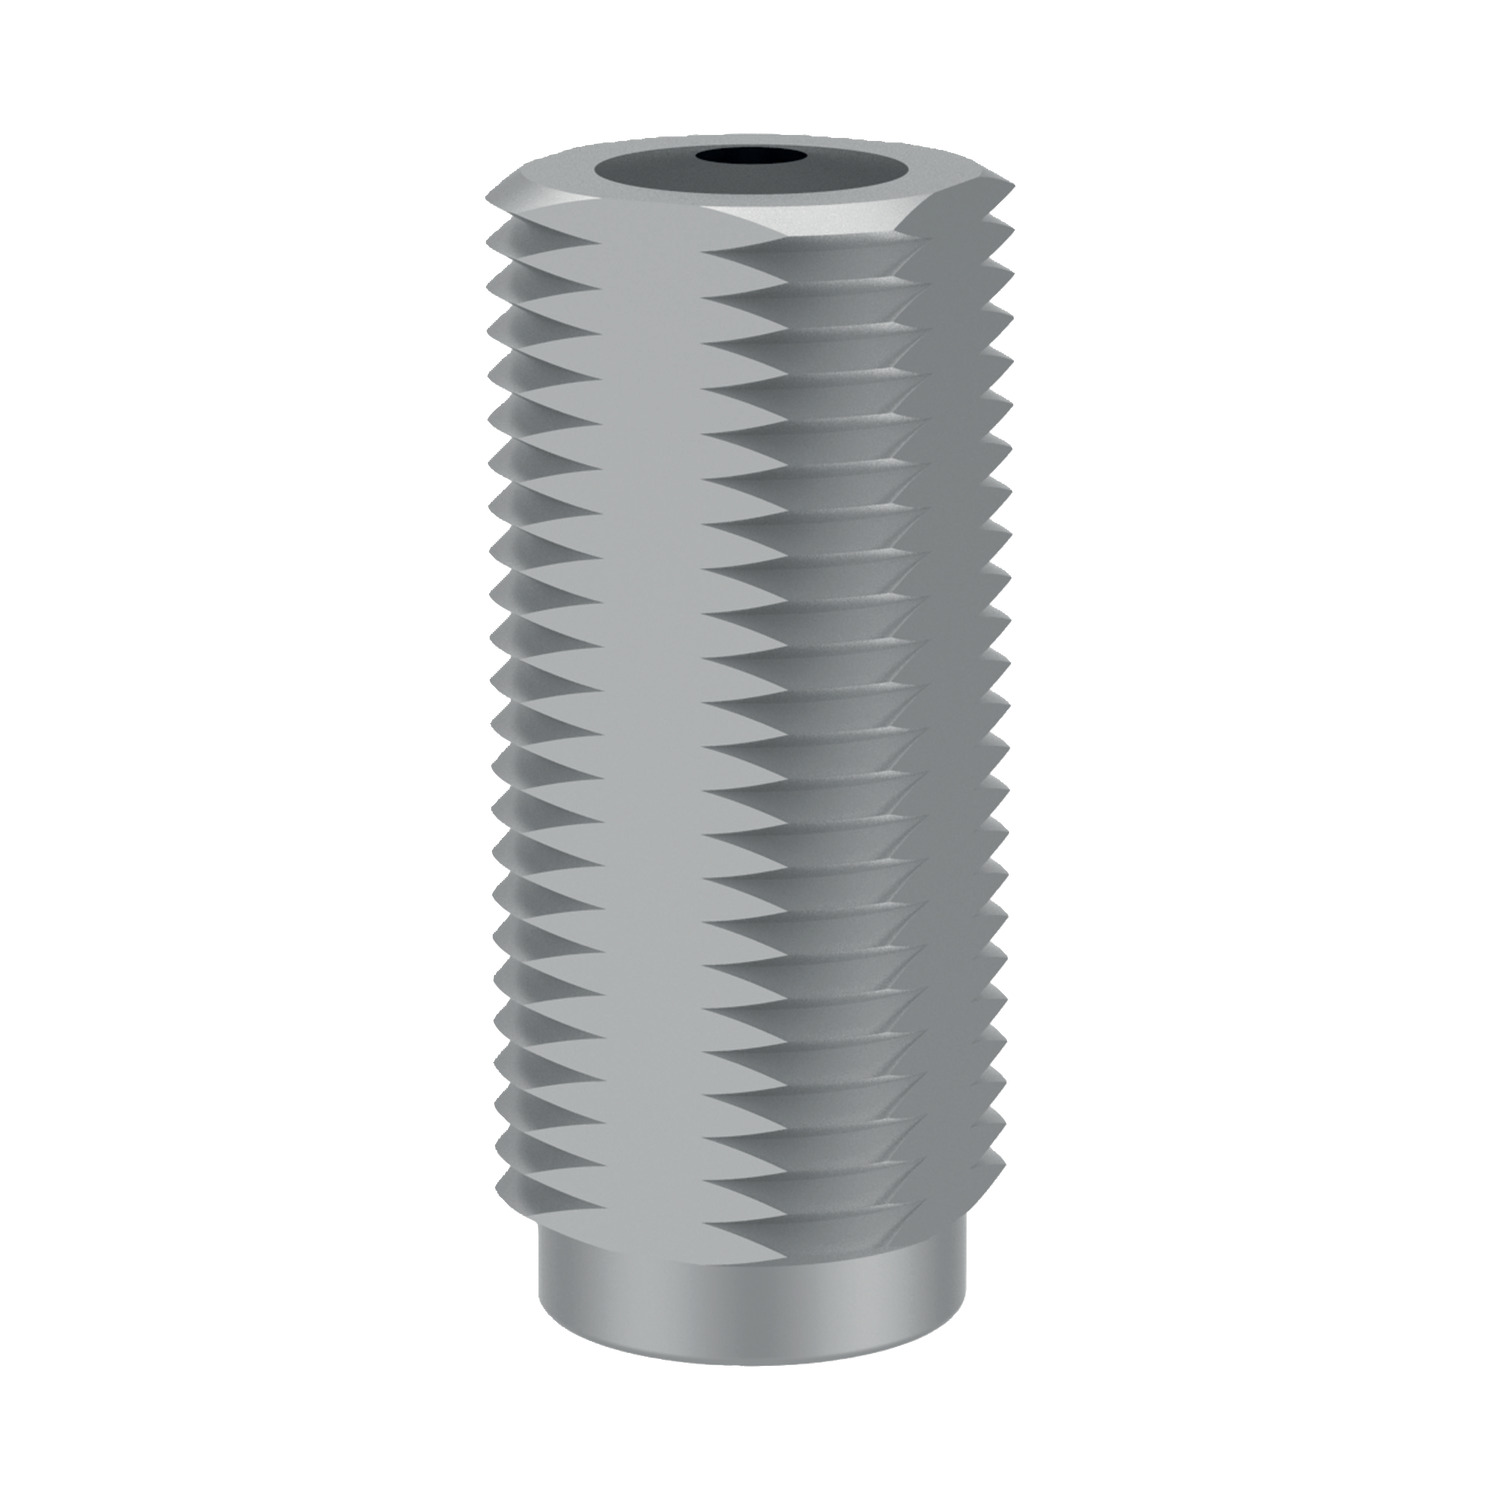 Product 32860.2, Side-Thrust Pins - Threaded with seal - for use with pins of your own design / 